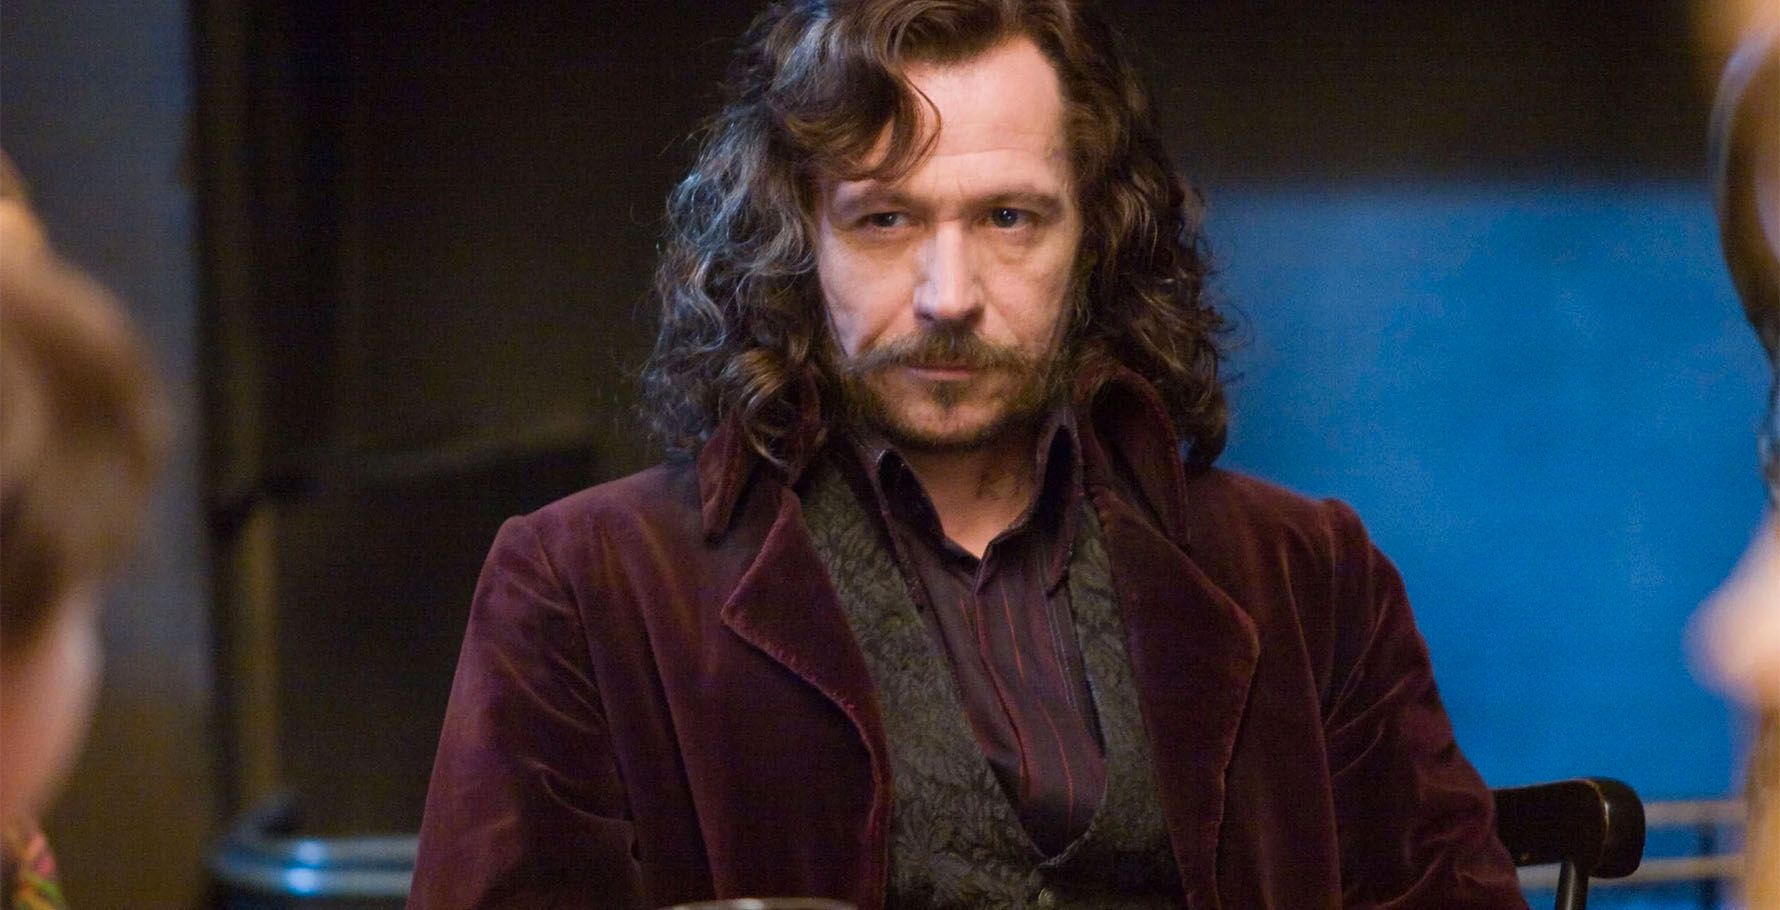 What do Harry, Ron, and Hermione call Sirius when others are present?